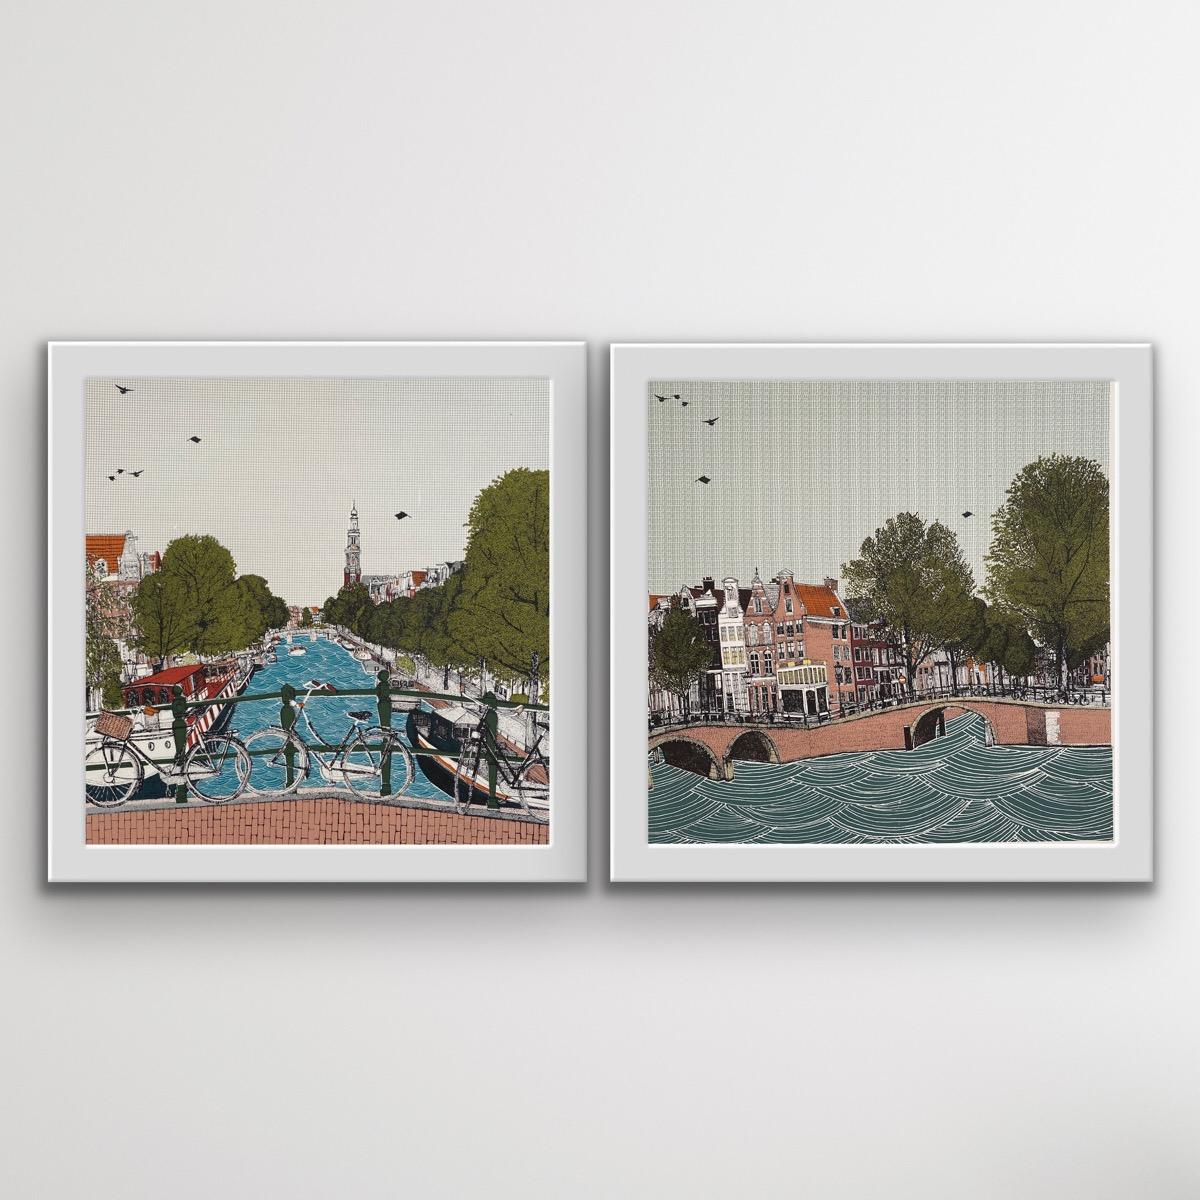 Clare Halifax Landscape Print - Canal Ring, Amsterdam and Cycle City, Amsterdam Diptych